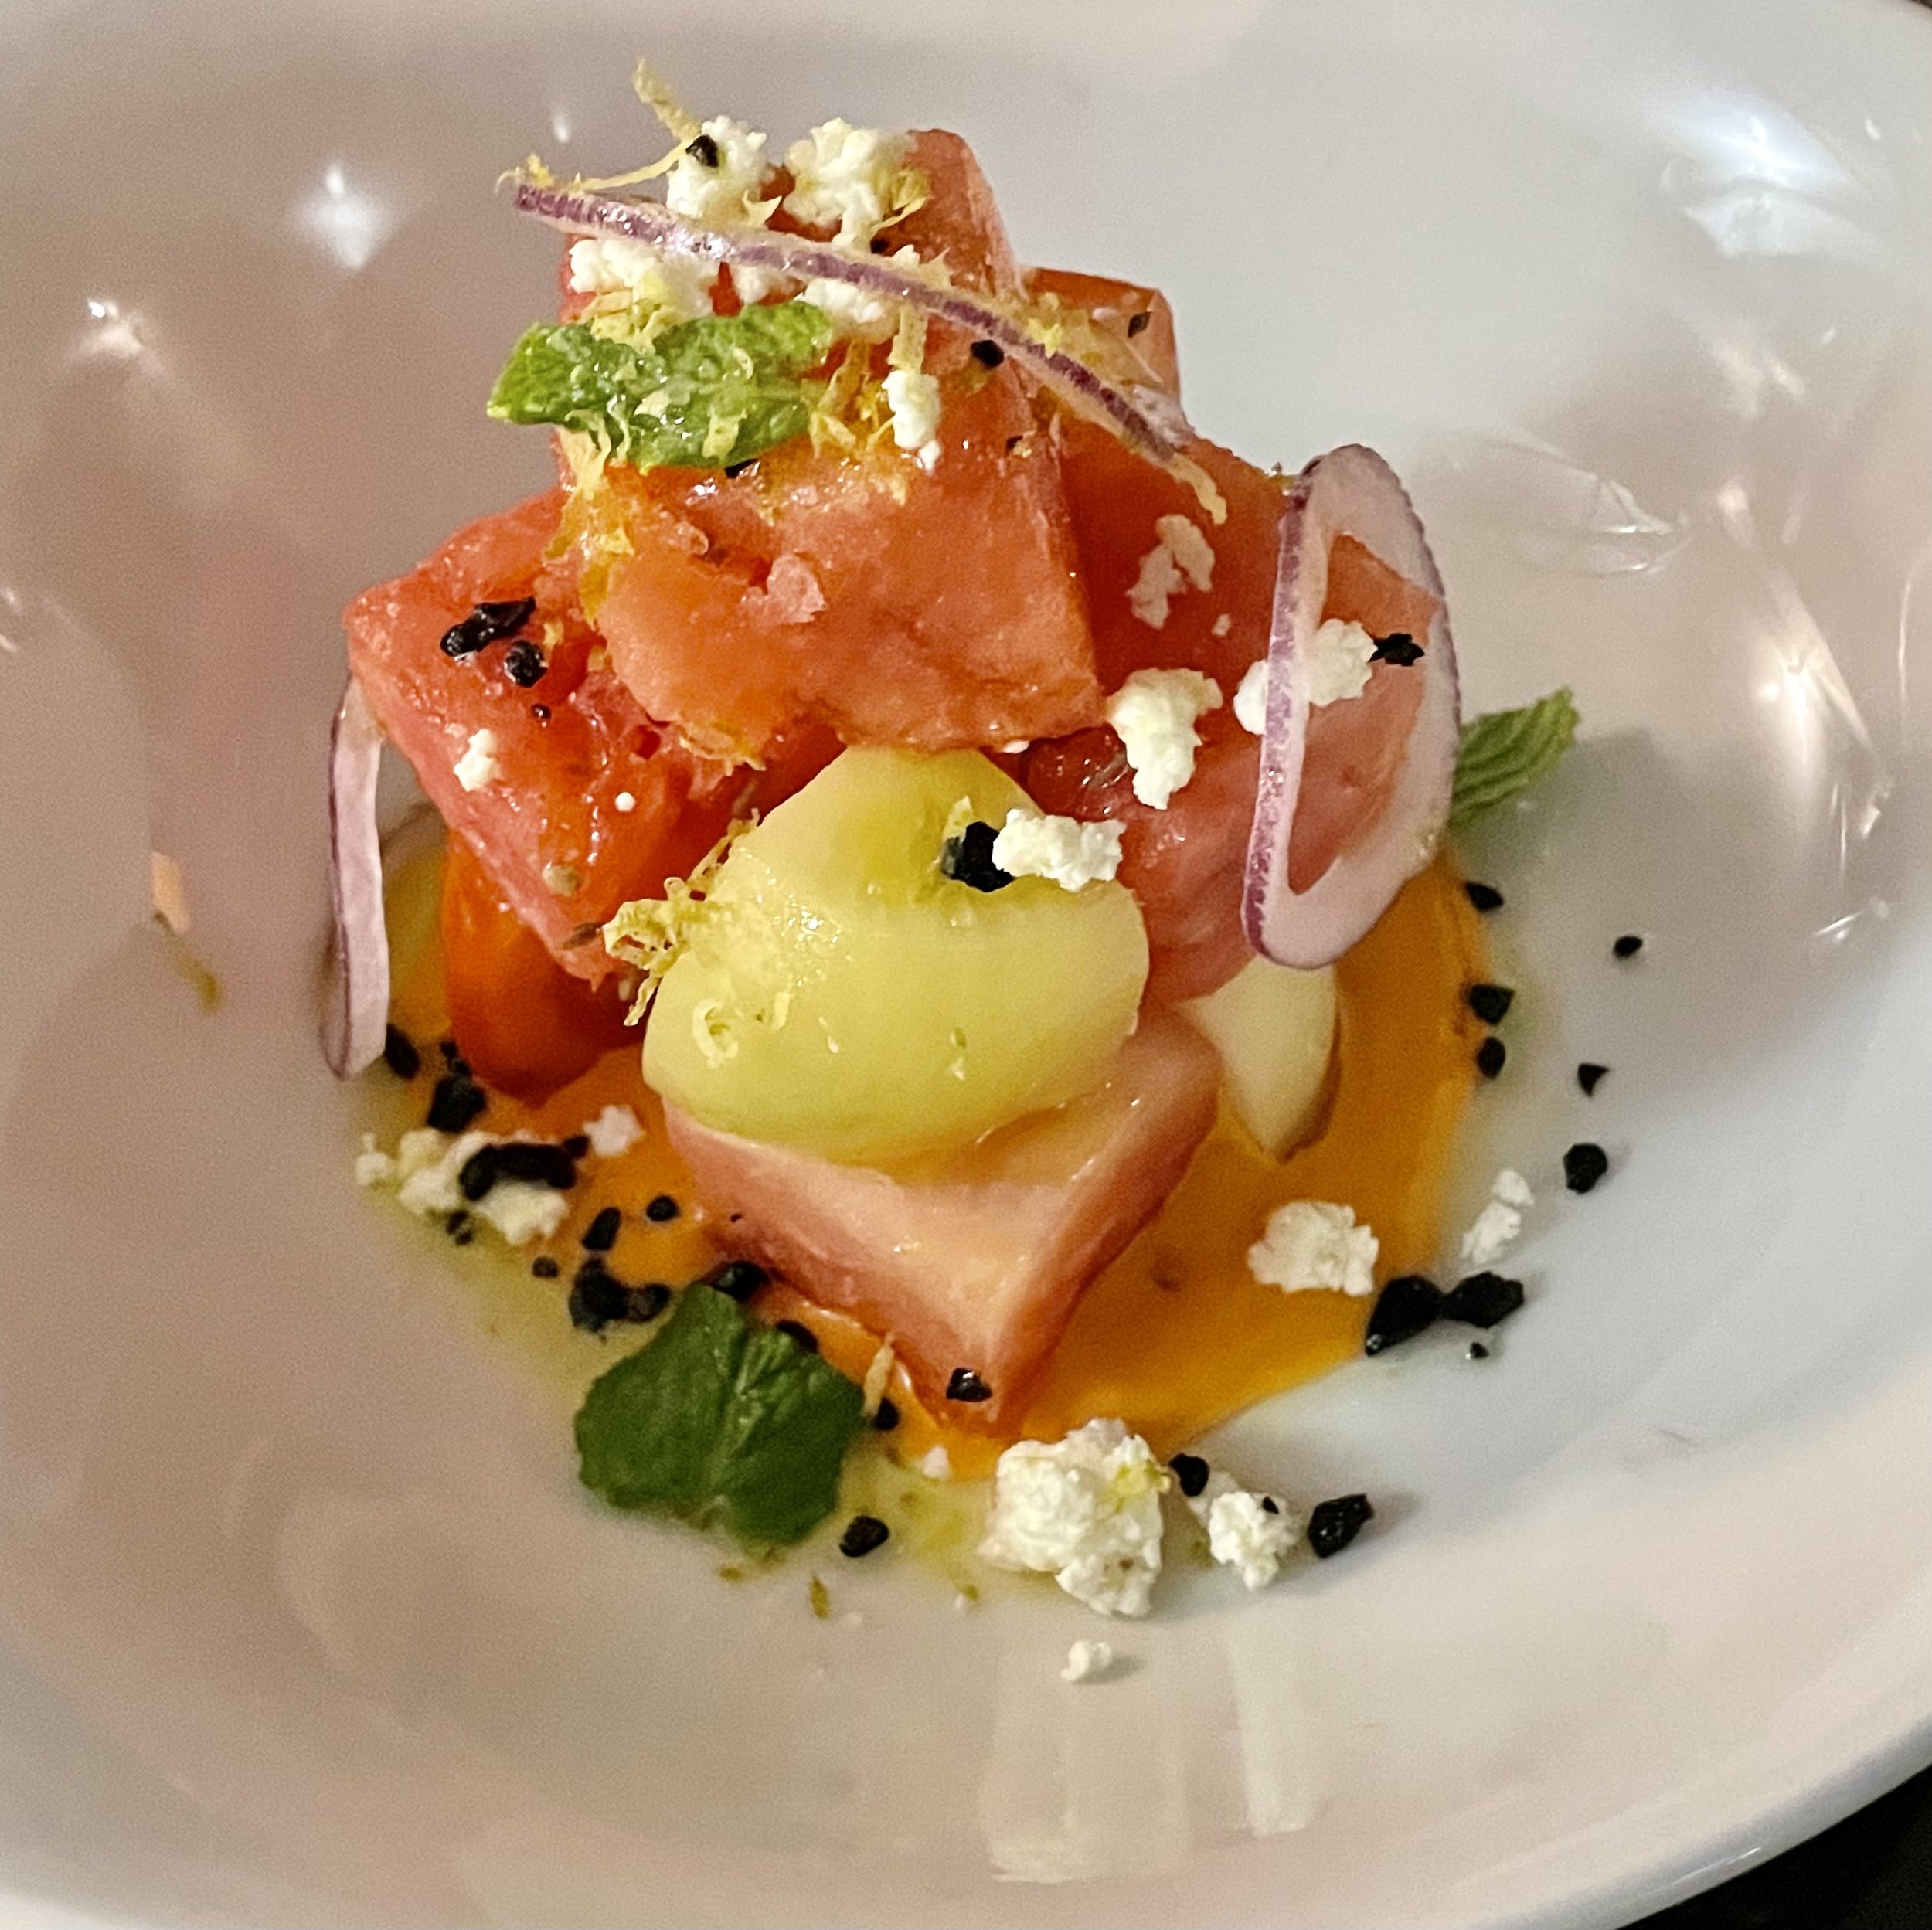  Annie Pettry's tomato and watermelon salad 